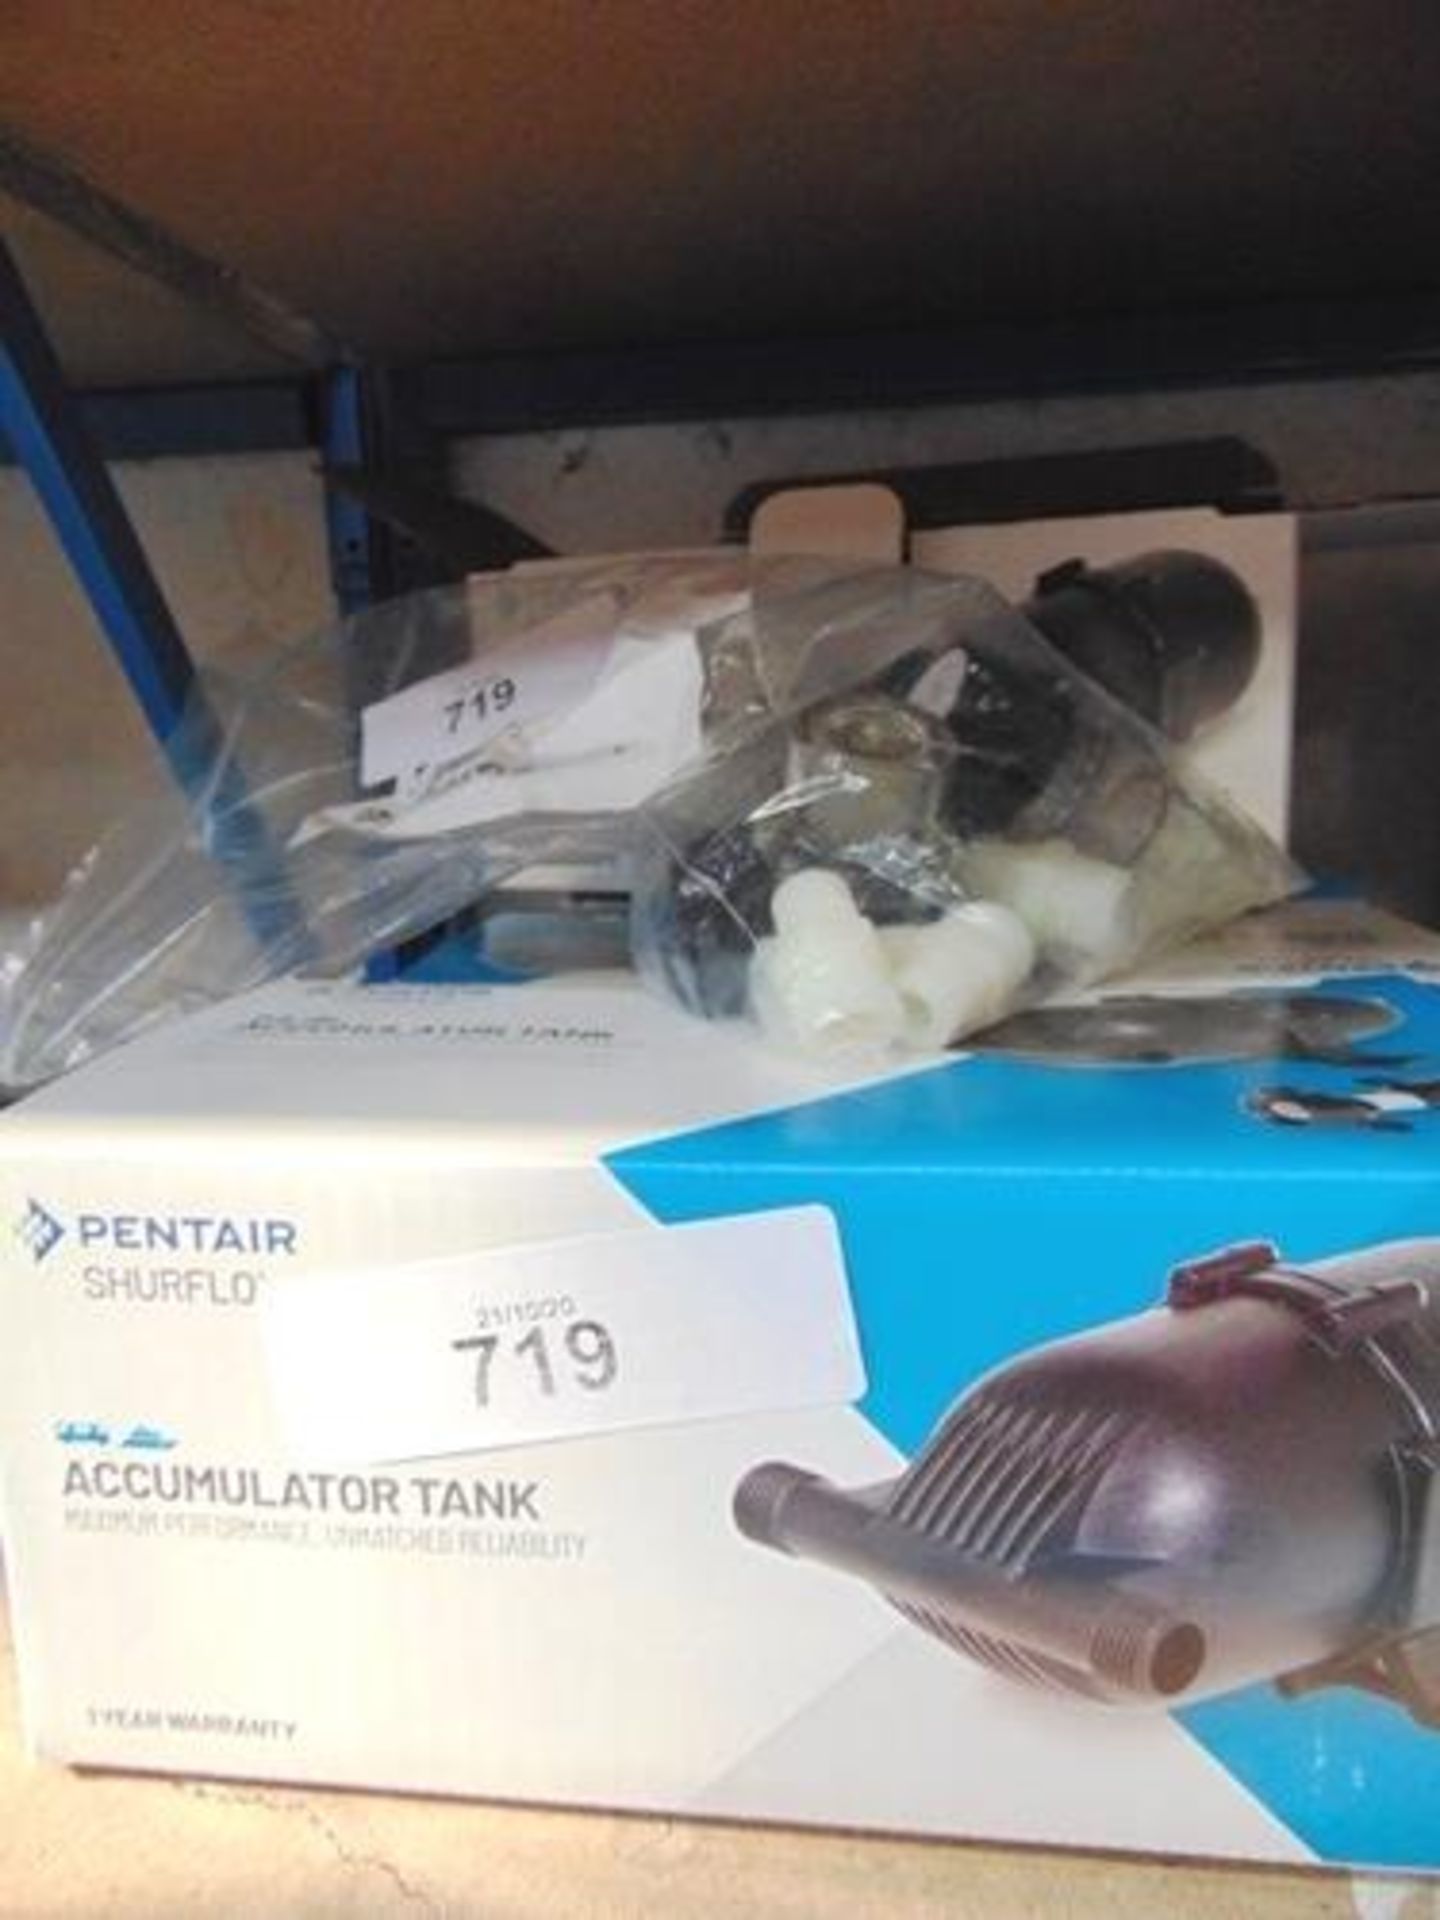 5 x Pentair Shurflo accumulator tanks, 1/2 inch inlets together with 5 x 1/2 inch strainers - New in